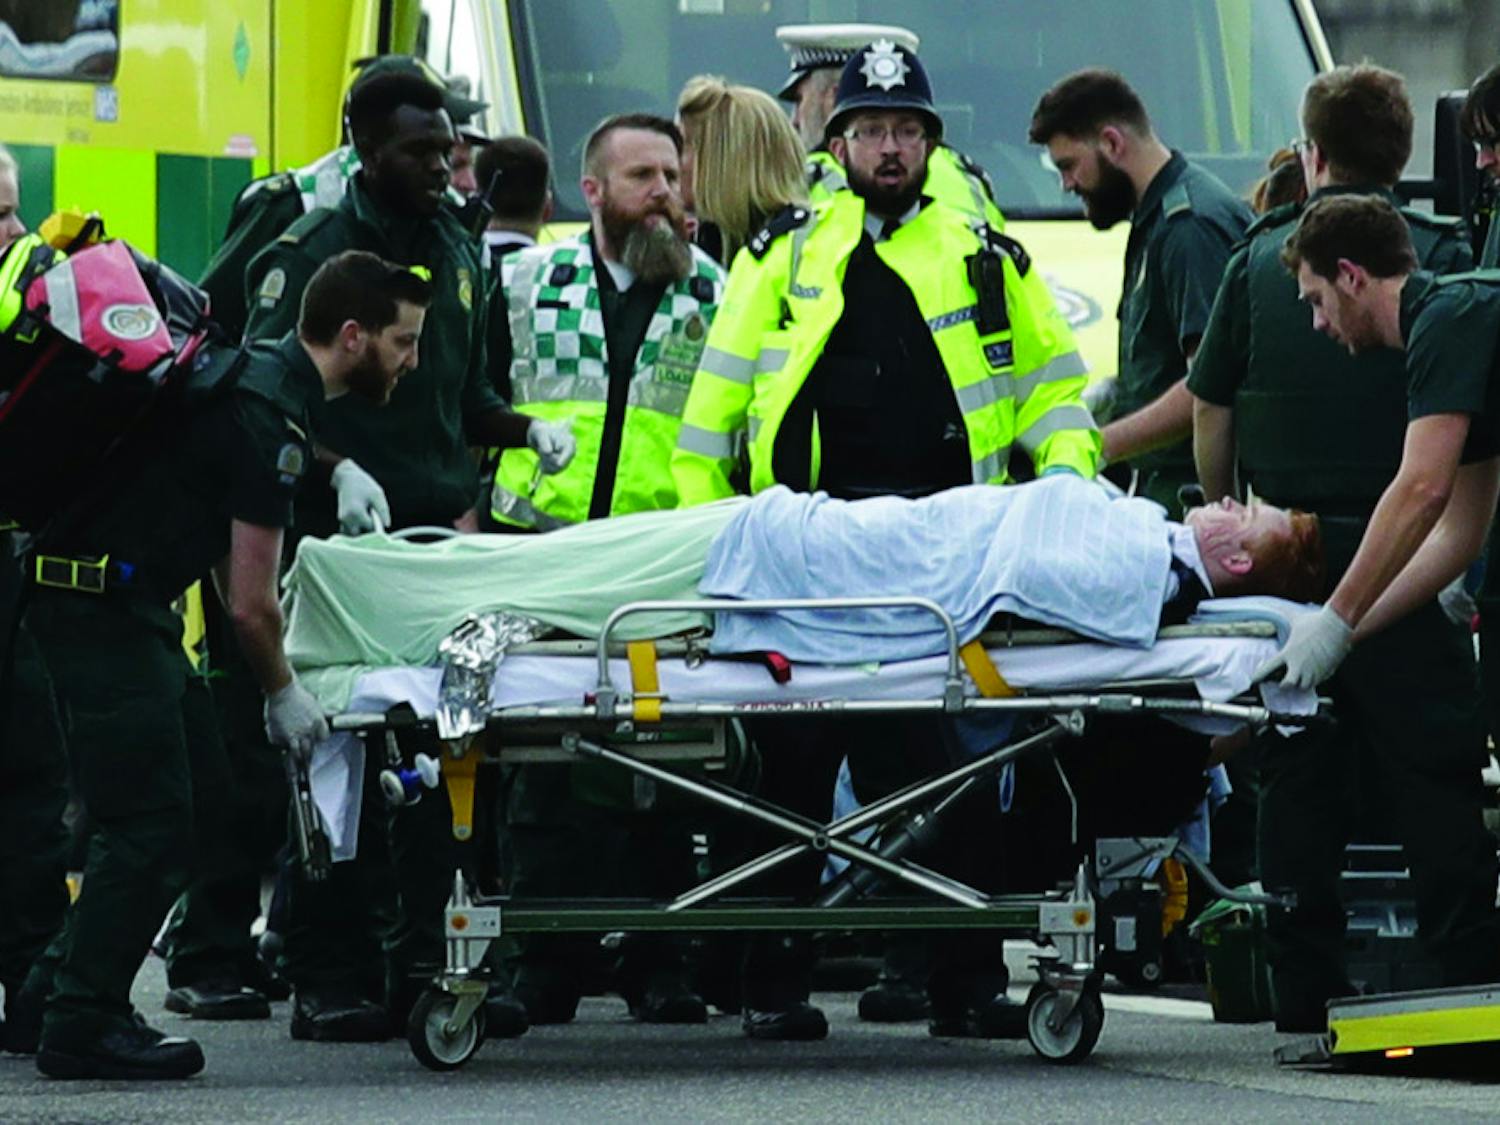 Emergency services staff provide medical attention to injured people on the south side of Westminster Bridge, close to the Houses of Parliament in London, Wednesday, March 22, 2017. London police say they are treating a gun and knife incident at Britain's Parliament "as a terrorist incident until we know otherwise." The Metropolitan Police says in a statement that the incident is ongoing. Officials say a man with a knife attacked a police officer at Parliament and was shot by officers. Nearby, witnesses say a vehicle struck several people on the Westminster Bridge. 